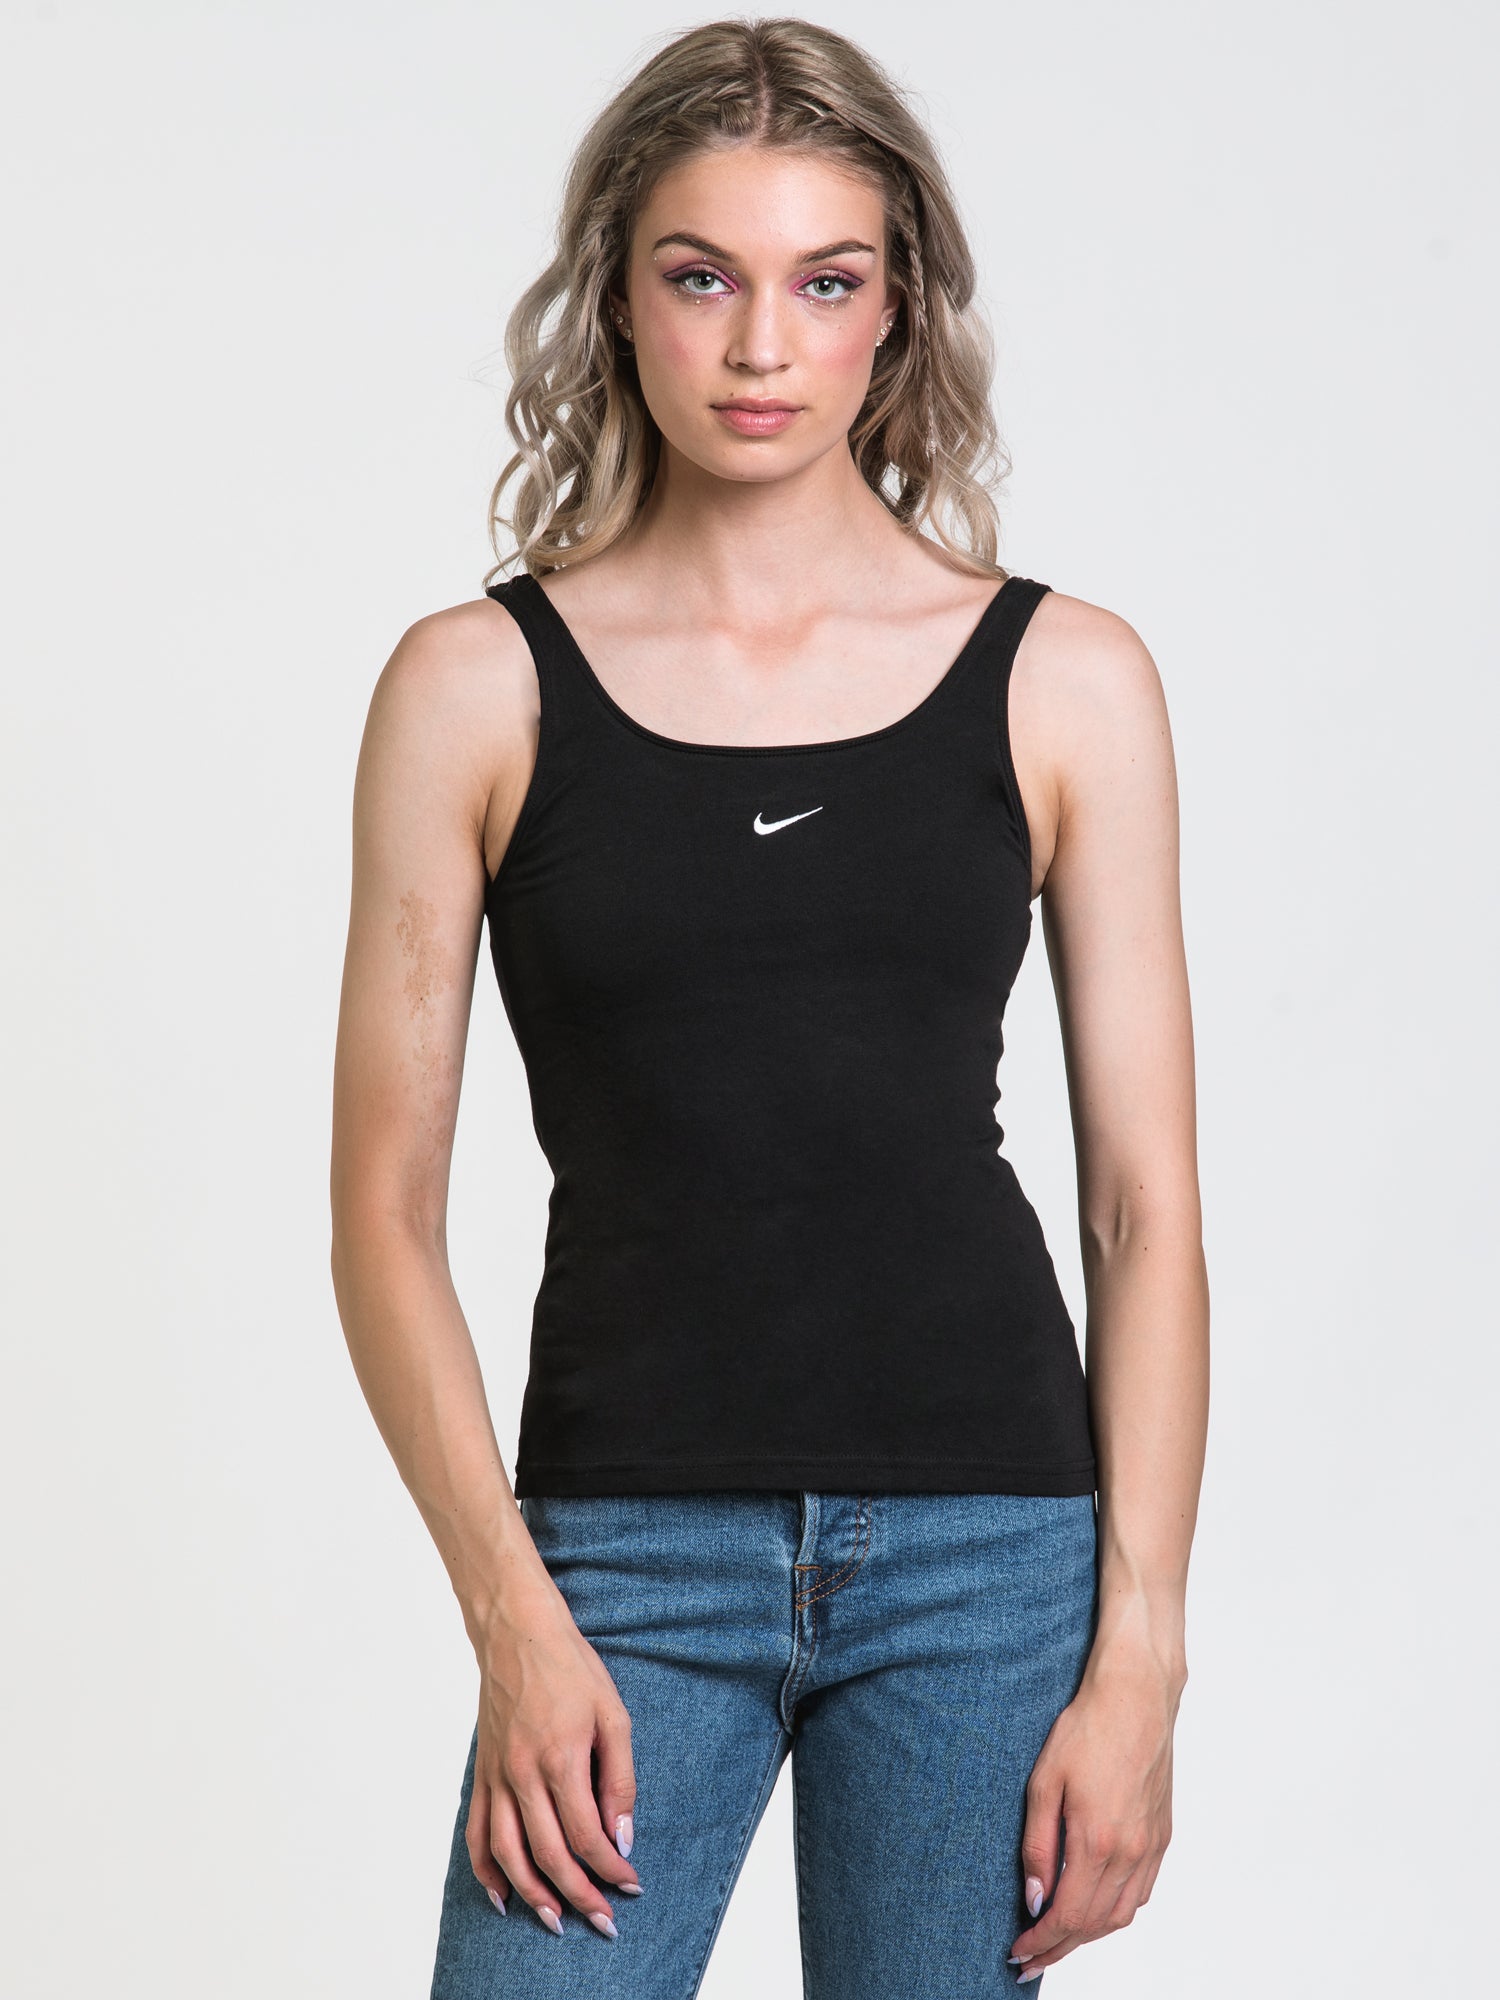 Basic Solid Cami Tank, Made in Canada, Initiatives